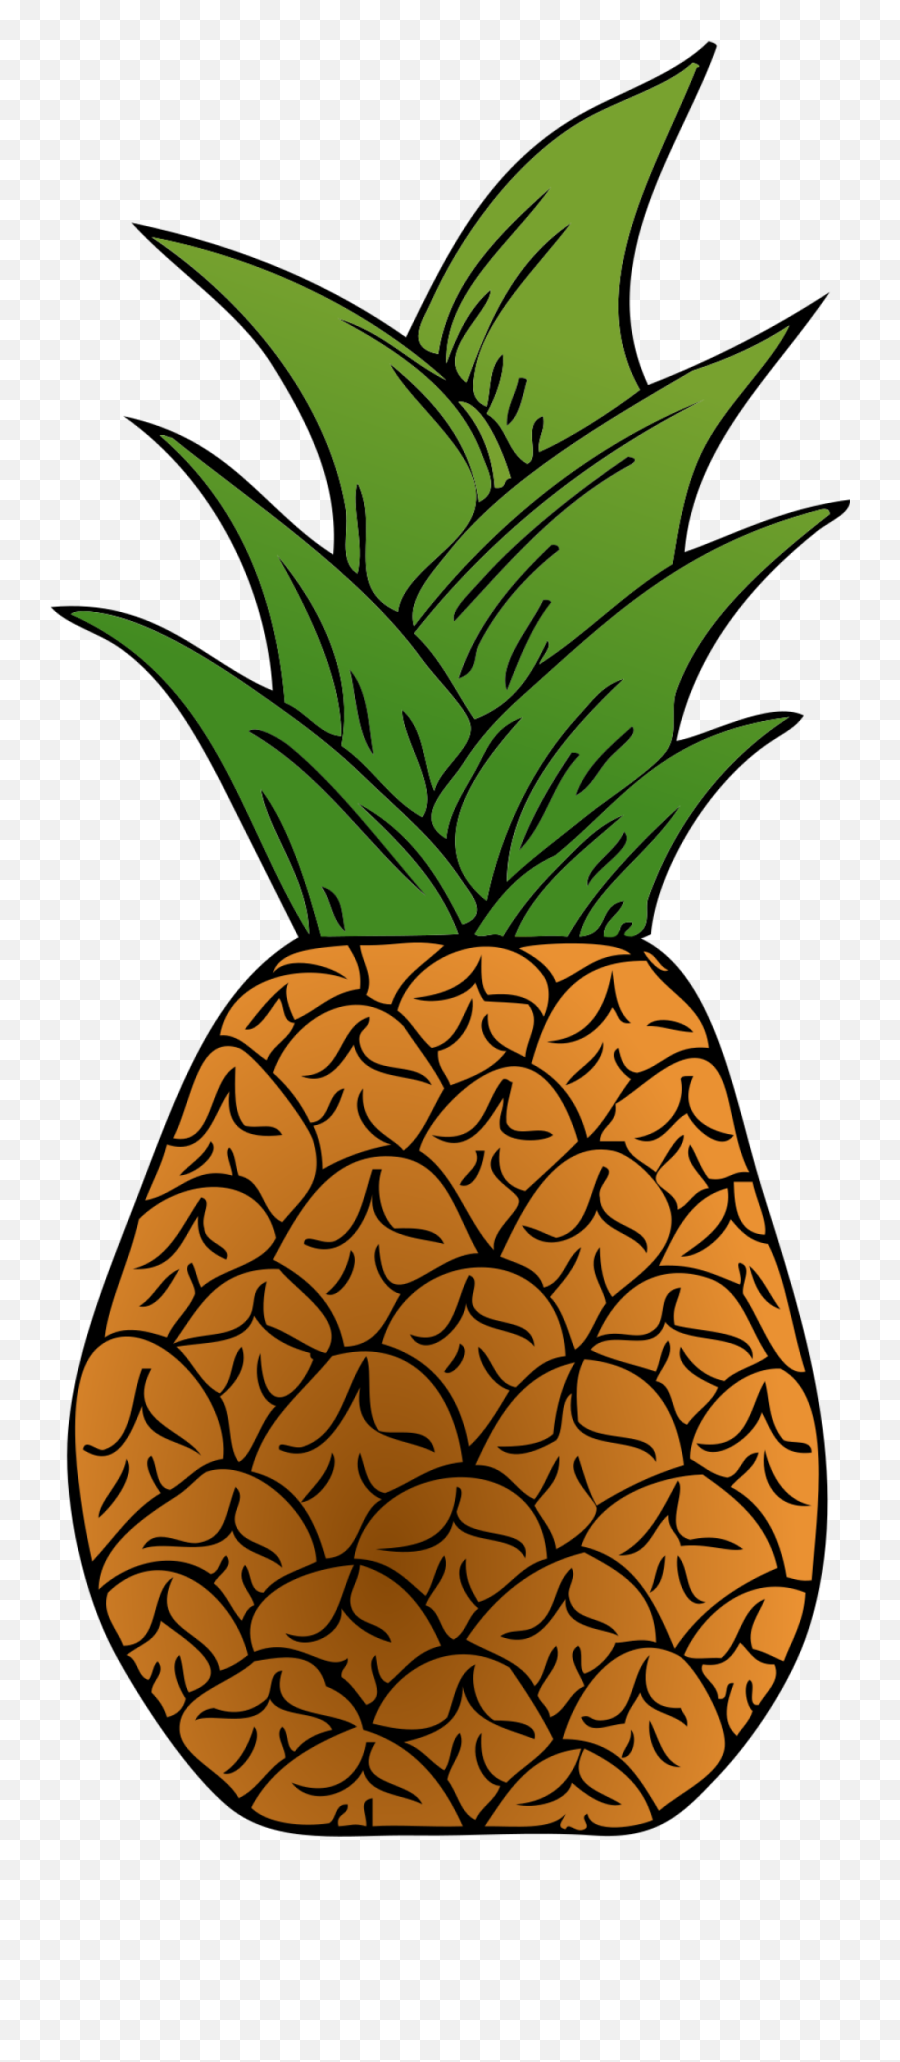 Pineapple Png Clip Arts For Web - Clip Arts Free Png Backgrounds Pineapple Top Cartoon,Pineapple Clipart Transparent Background